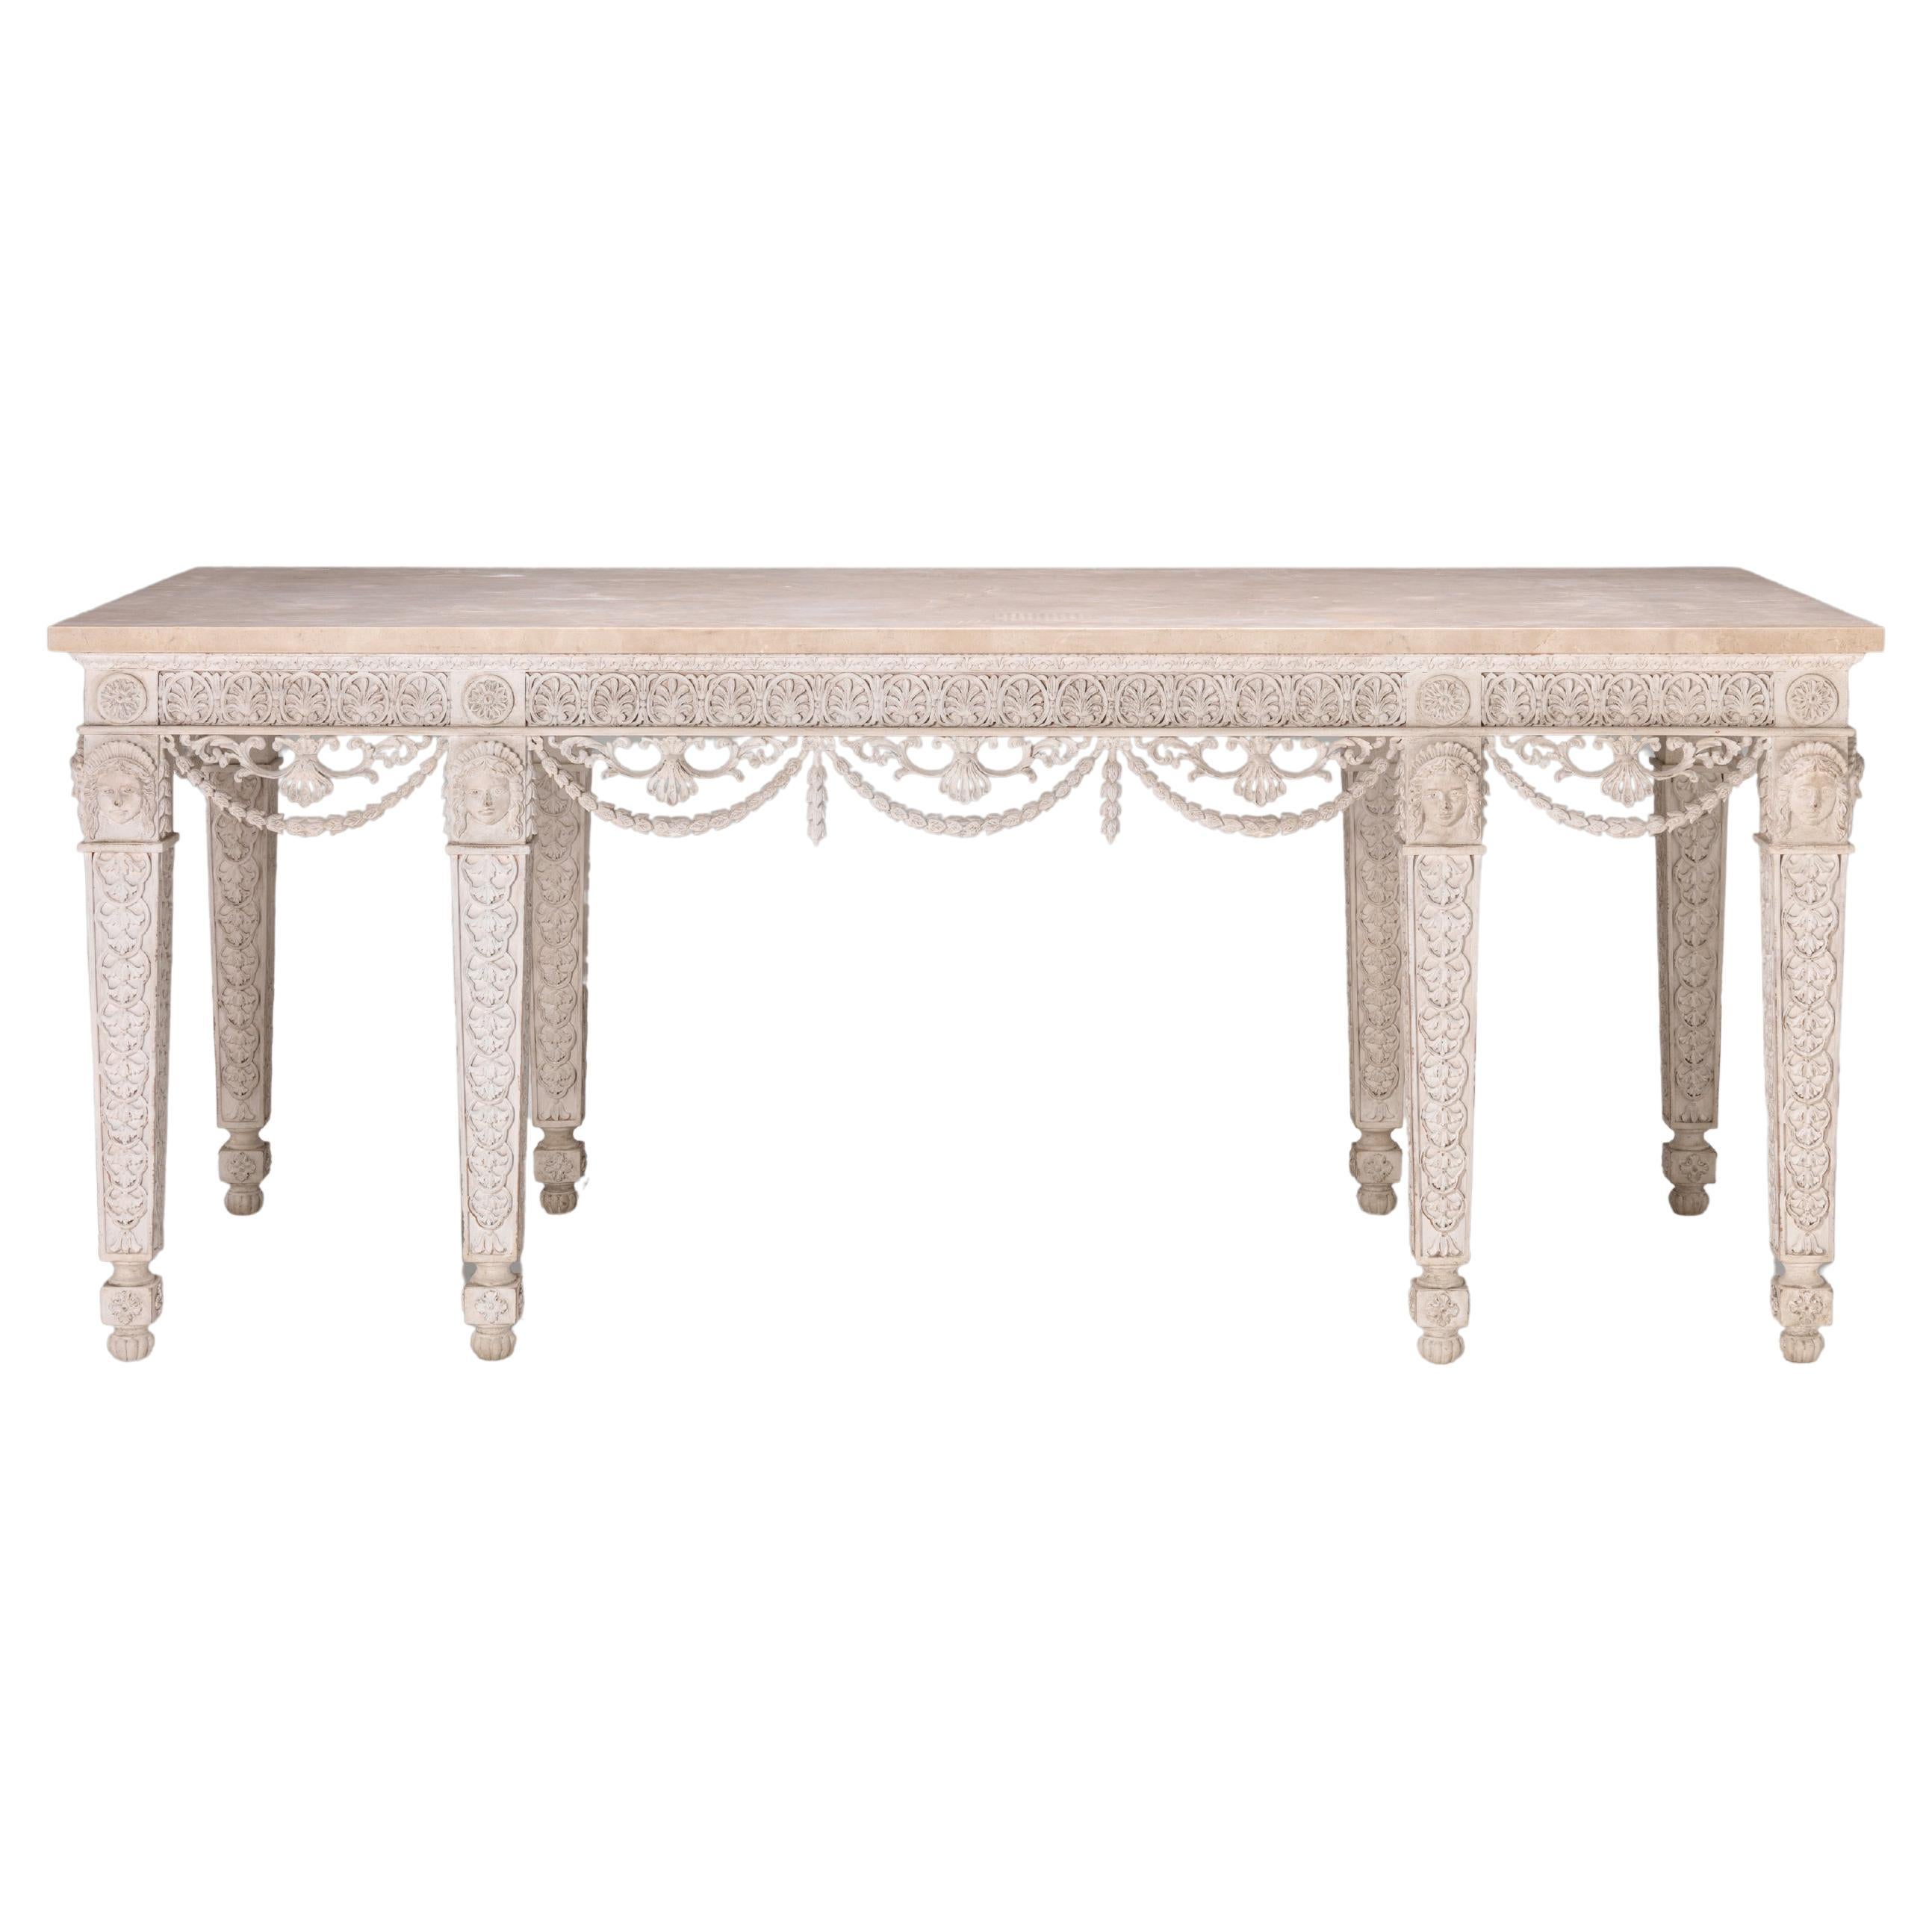 The Croome Court Console Table For Sale